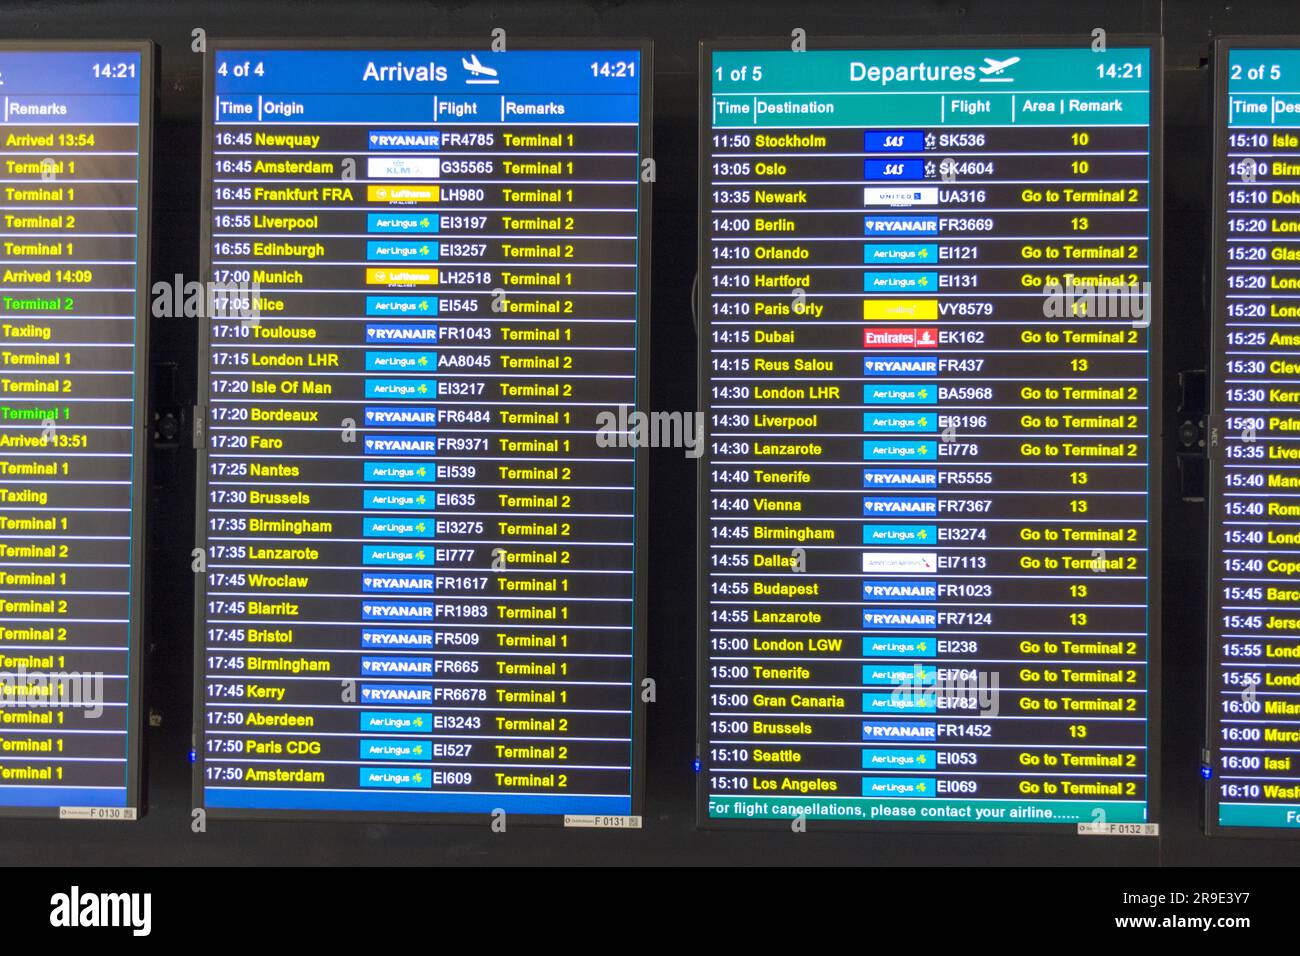 Dublin Airport, Ireland. Arrivals and Departures electronic indicator boards. Stock Photo